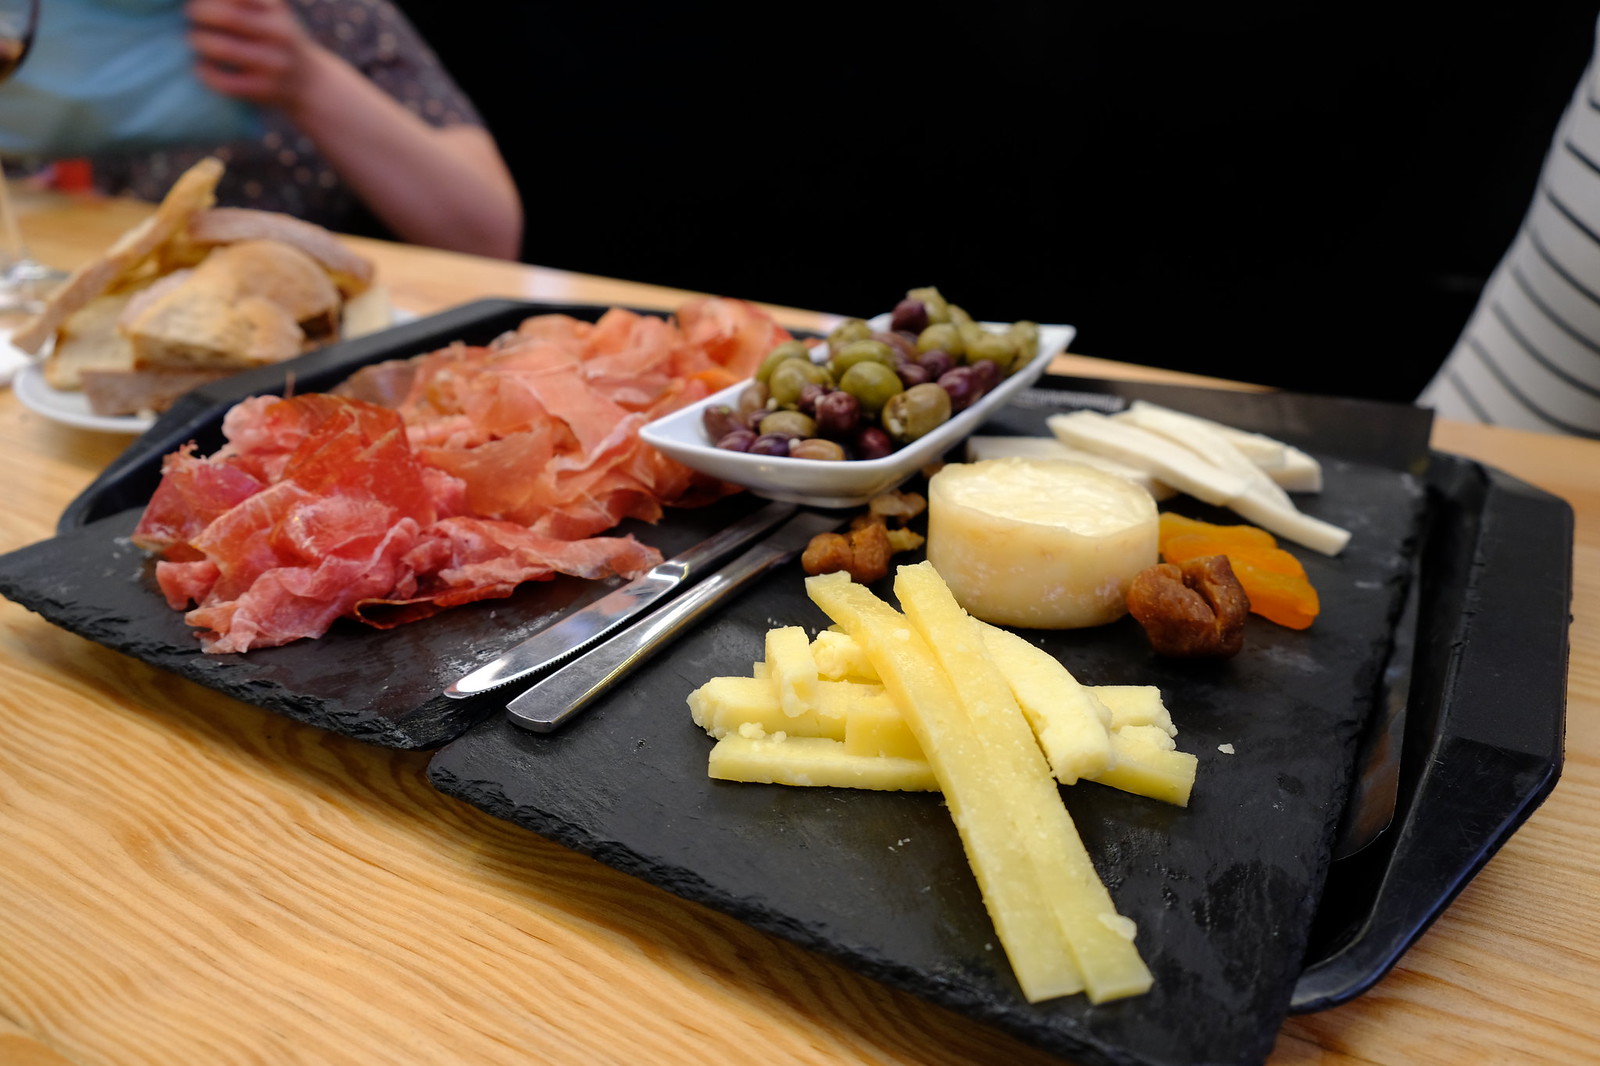 Jamon, 3 Types of Cheese and Olives